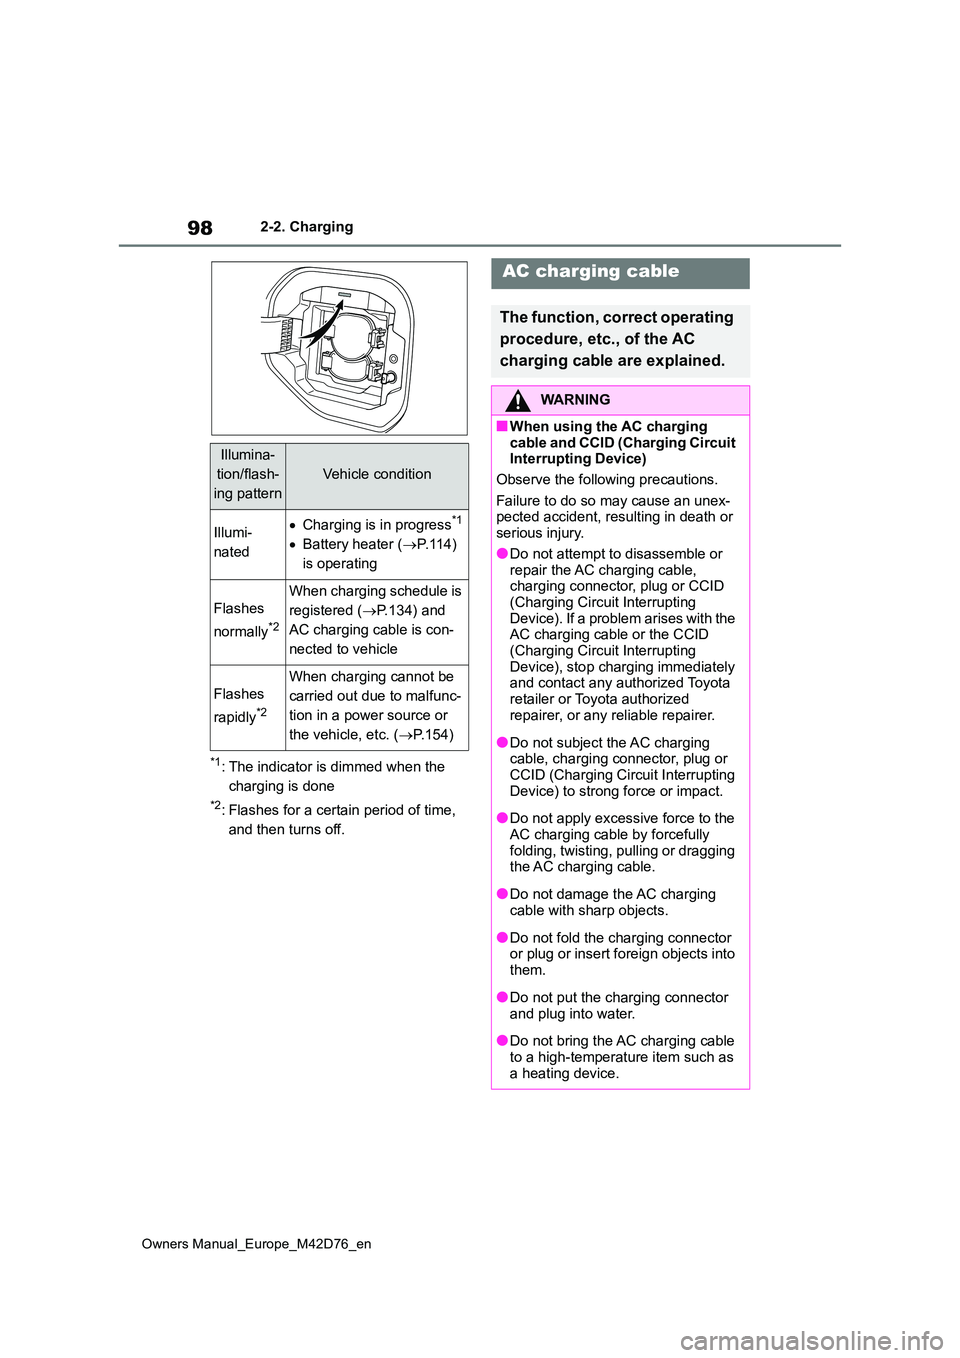 TOYOTA BZ4X 2022  Owners Manual (in English) 98
Owners Manual_Europe_M42D76_en
2-2. Charging
*1: The indicator is dimmed when the  
charging is done
*2: Flashes for a certain period of time, 
and then turns off.
Illumina-
tion/flash-
ing pattern